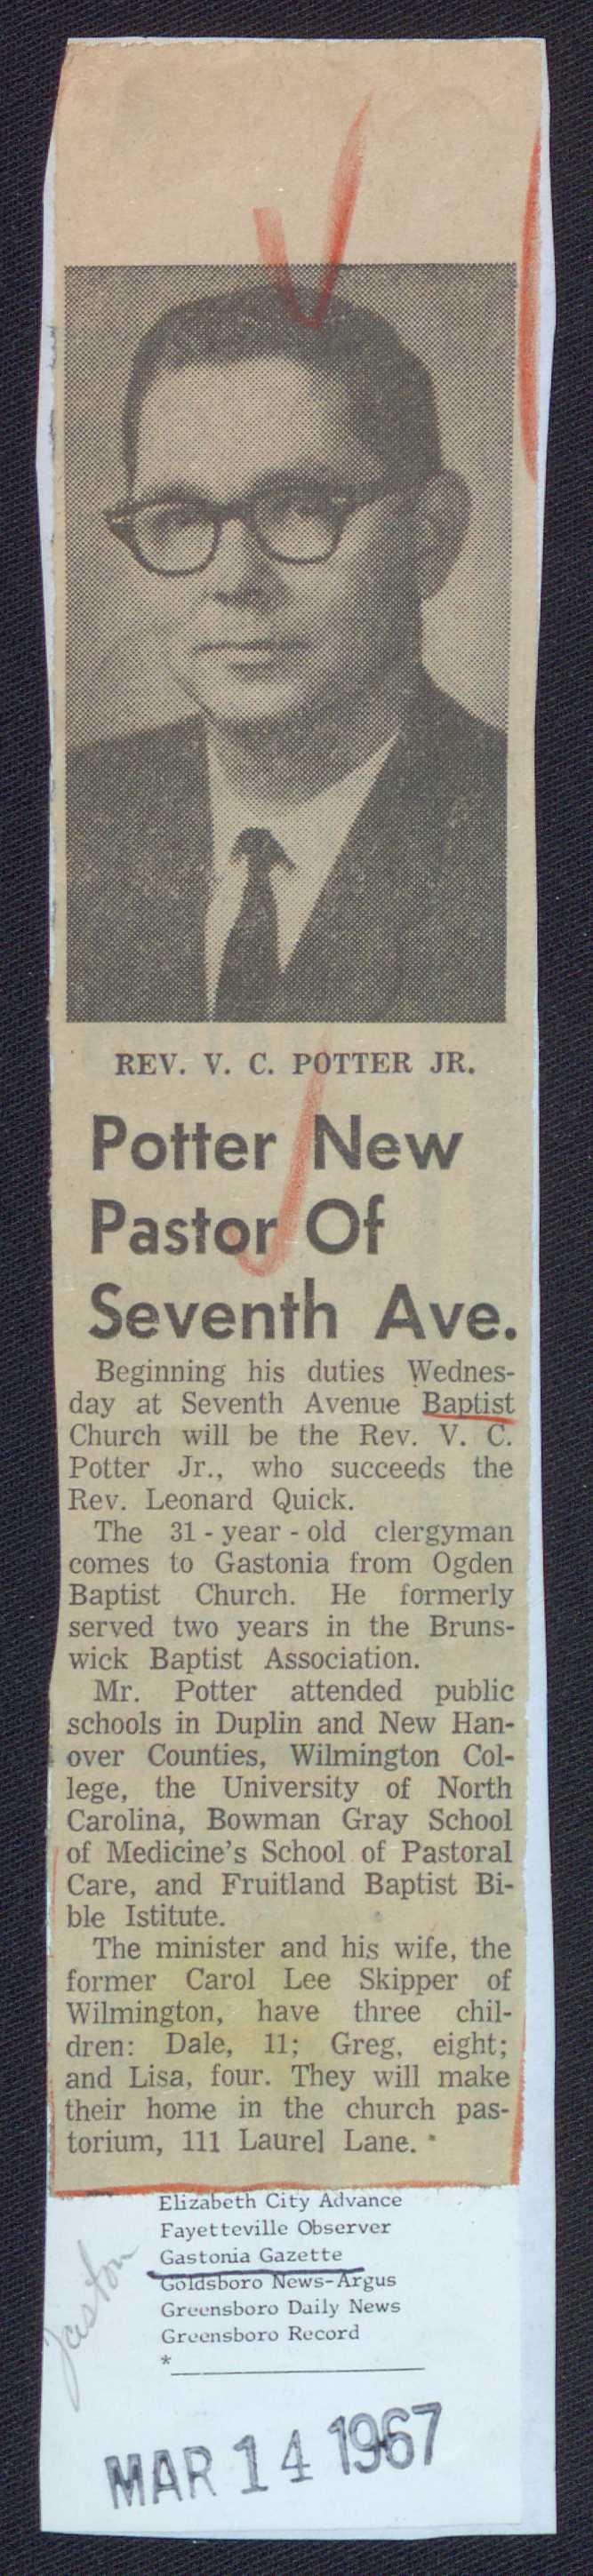 Potter New Pastor Of Seventh Ave. Beginning his duties Wednesday at Seventh Avenue Bapti< Church will be the Rev. V.. Potter Jr., who succeeds the Rev. Leonard Quick.